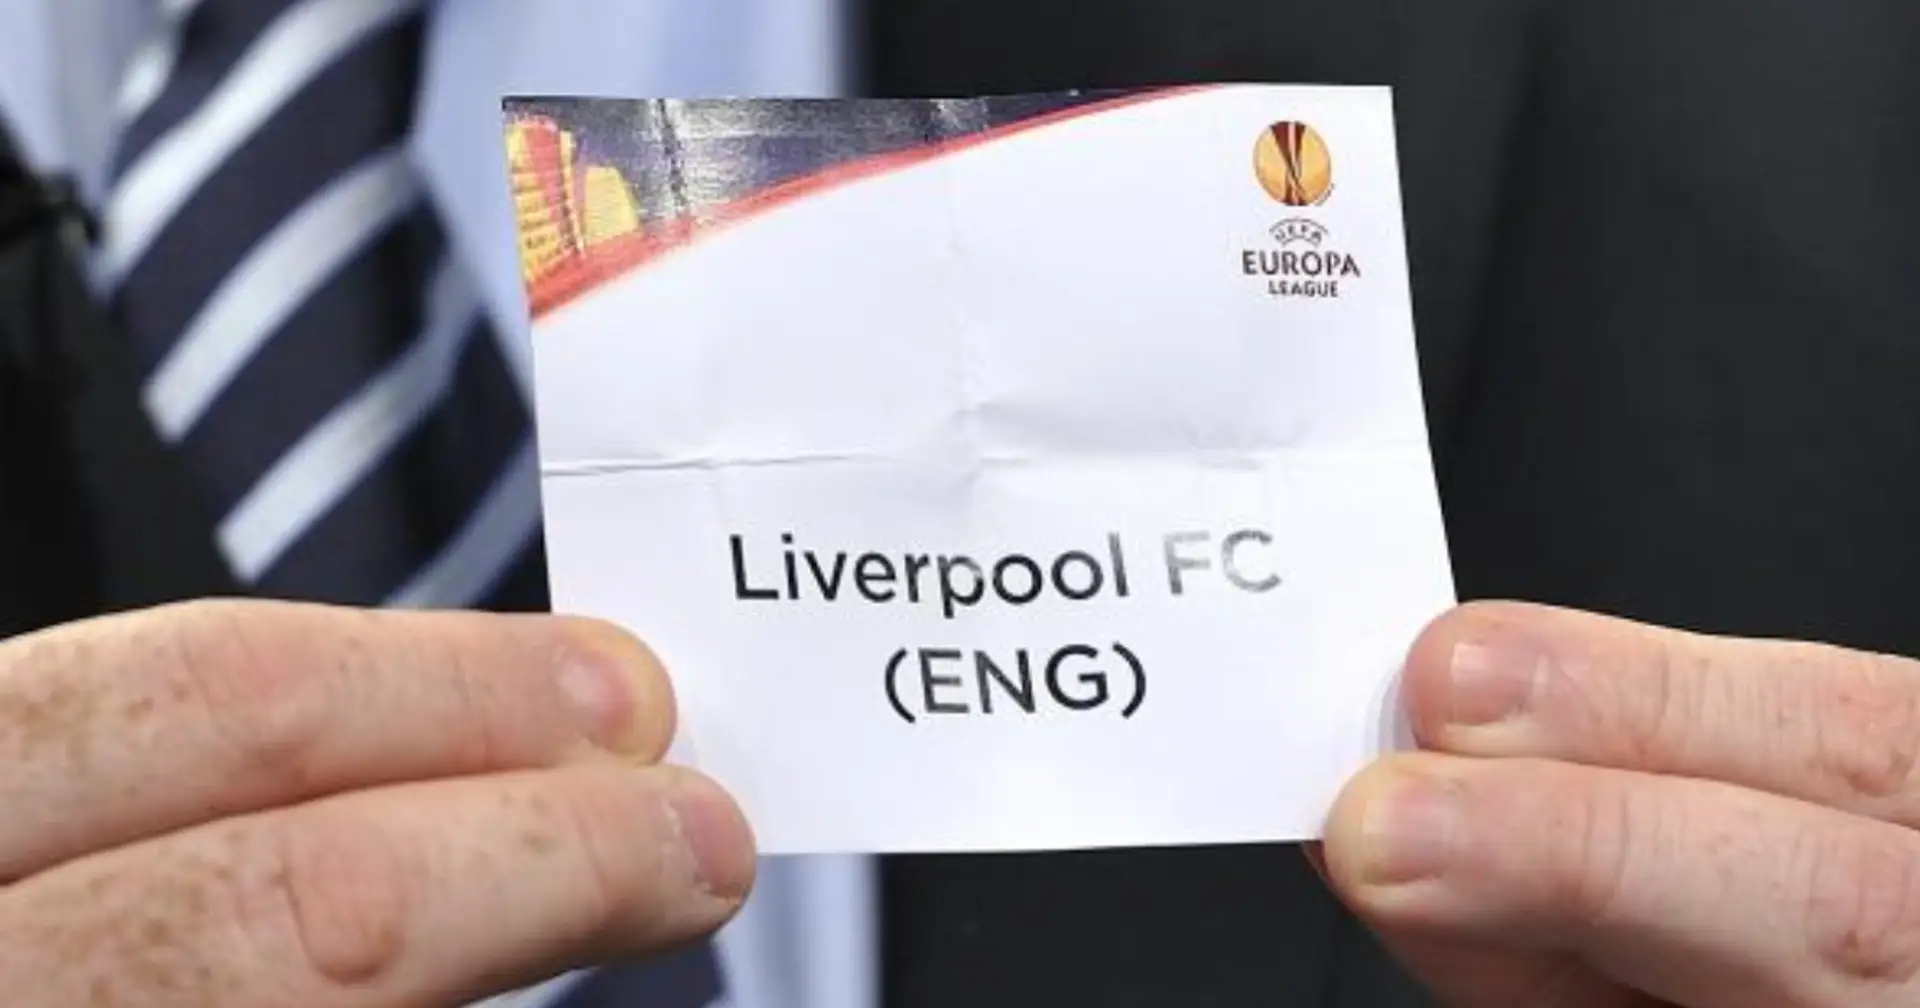 Europa League draw coming up: every team Liverpool can face in Round of 16